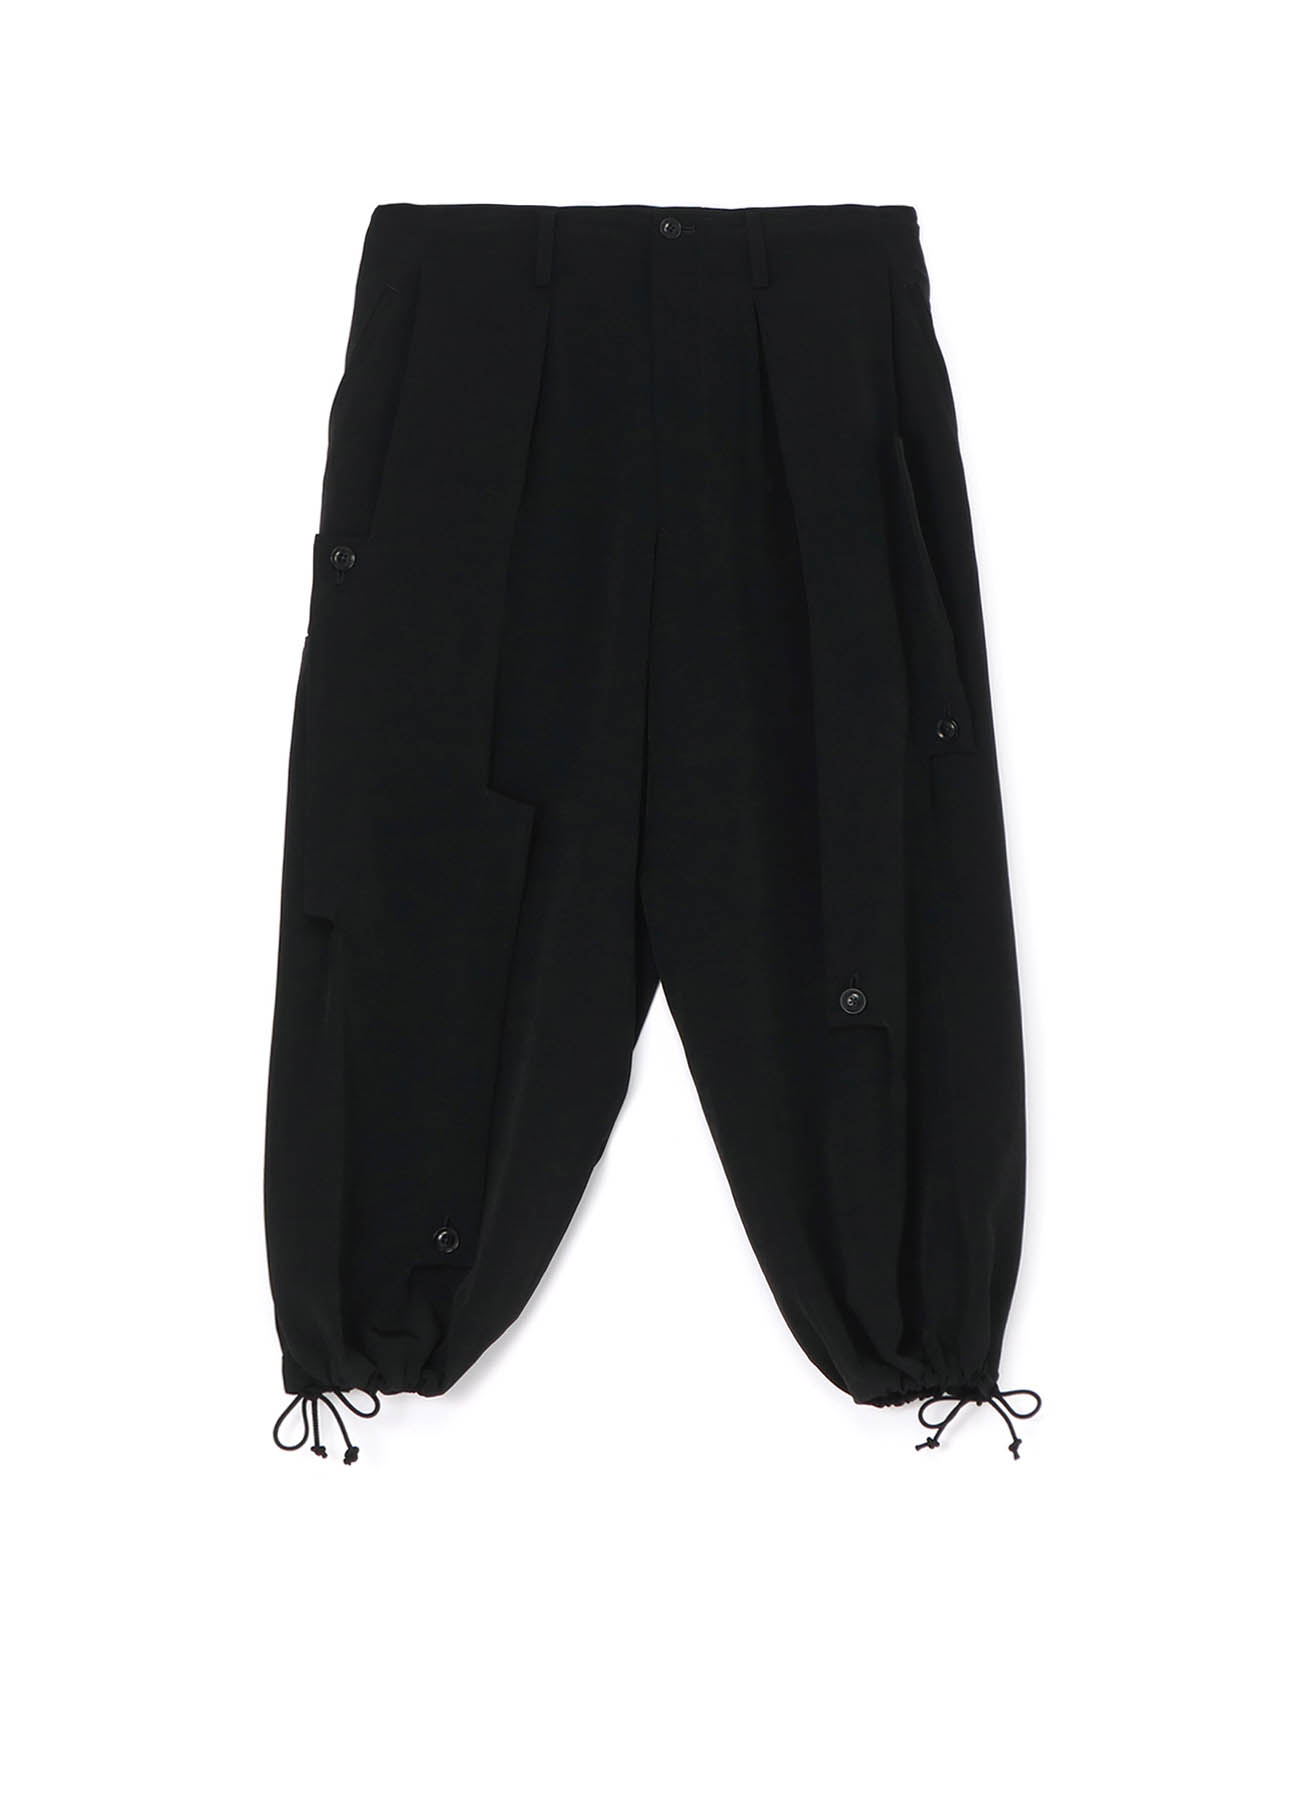 [Y's-Black Name]TRIACETATE POLYESTER CREPE de CHINE FLAPPY PANTS